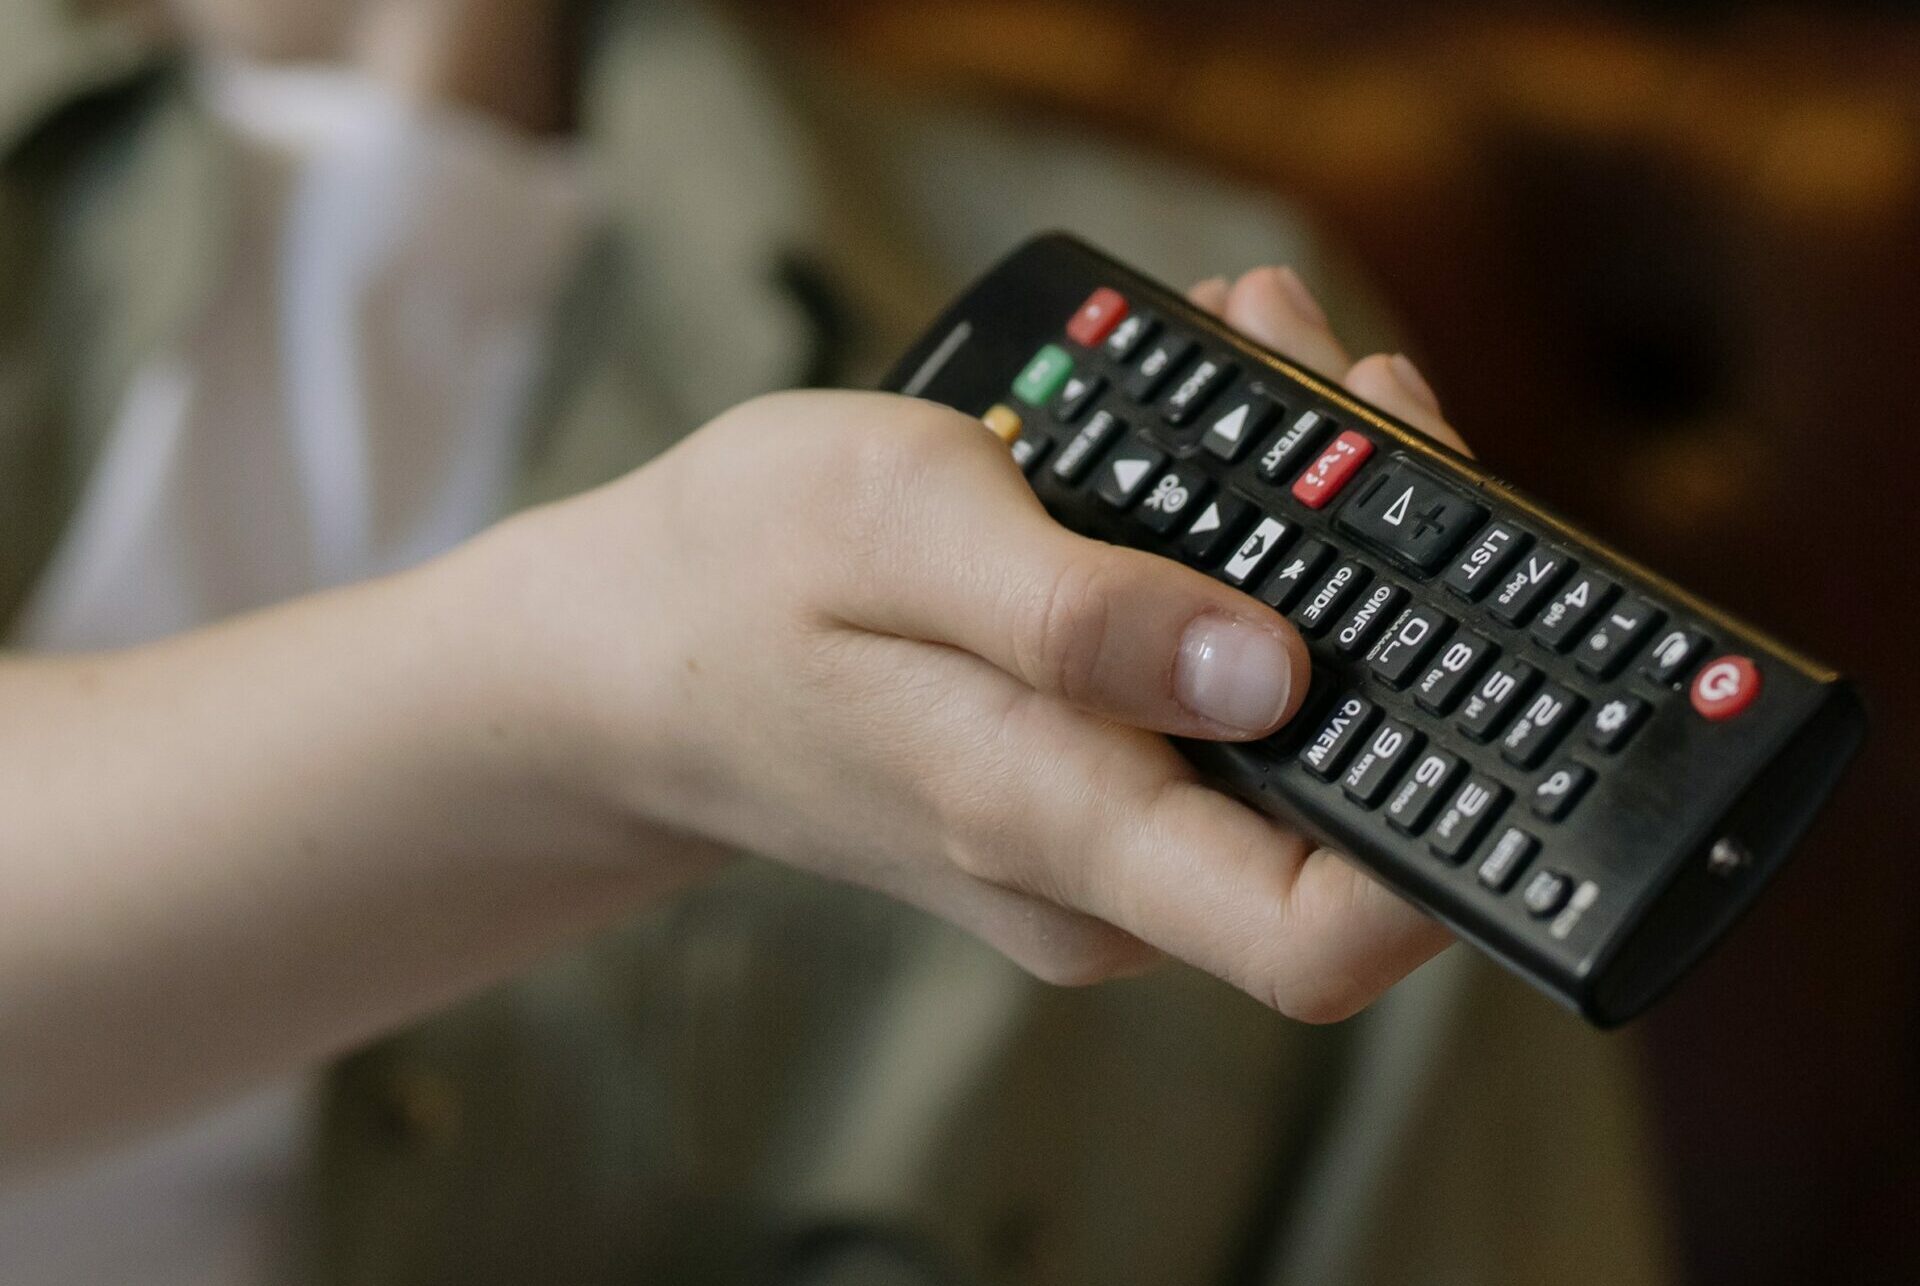 Finally, your remote control will be good as a new one